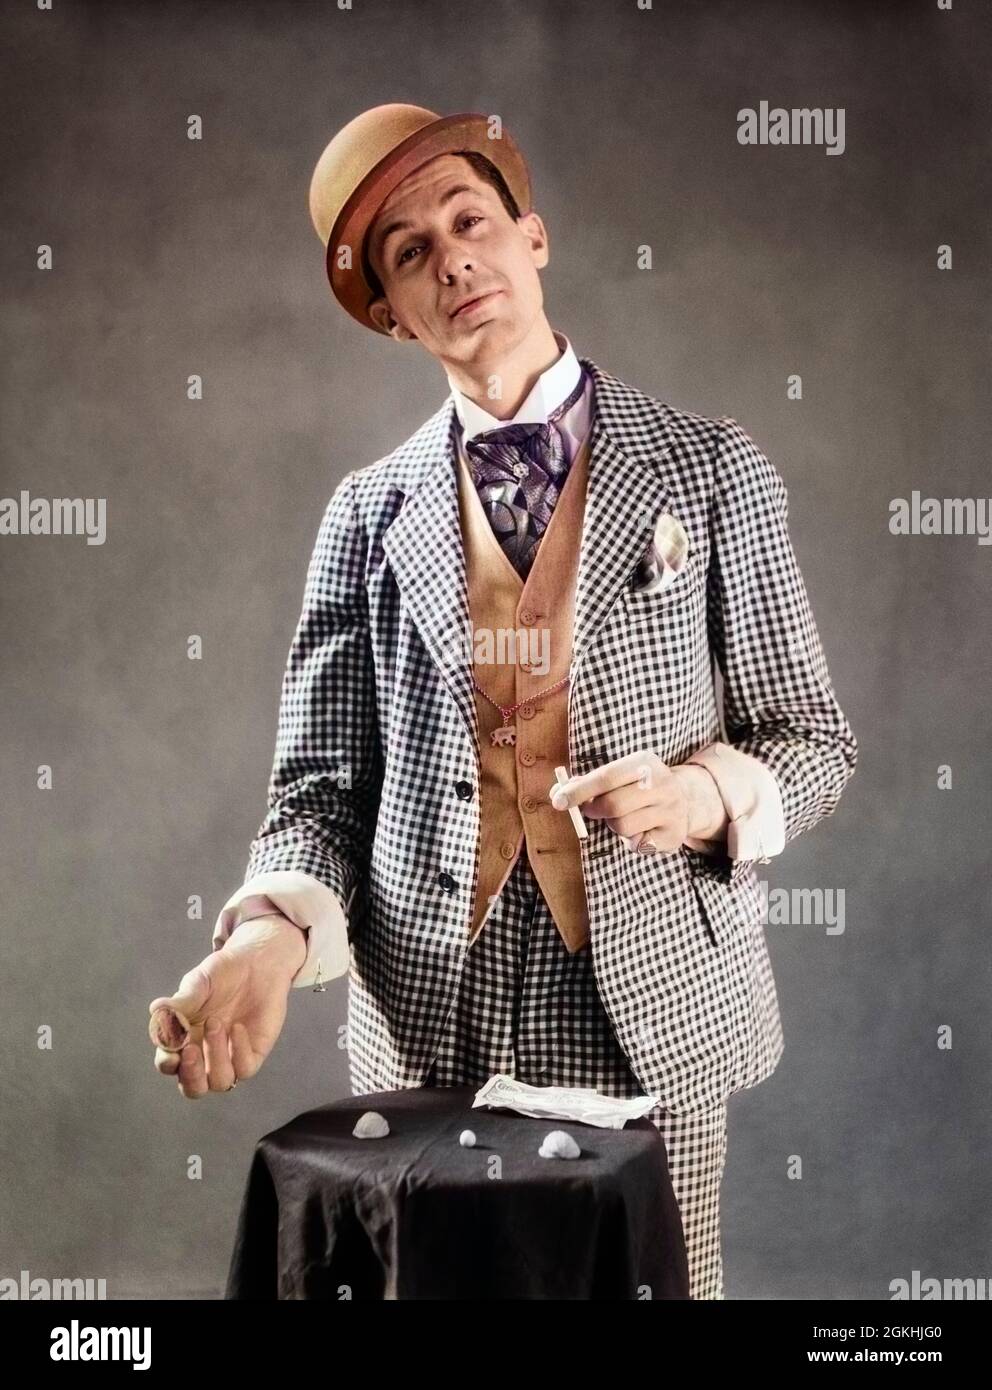 1930s CHARACTER FLIM-FLAM CON MAN BARKER BOWLER HAT CHECKED THREE PIECE  SUITE DEMONSTRATING SHELL GAME LOOKING AT CAMERA - s5270c HAR001 HARS  PERSONS SHELL CHARACTER FANCY MALES RISK CARNIVAL CONFIDENCE MIDDLE-AGED B&W